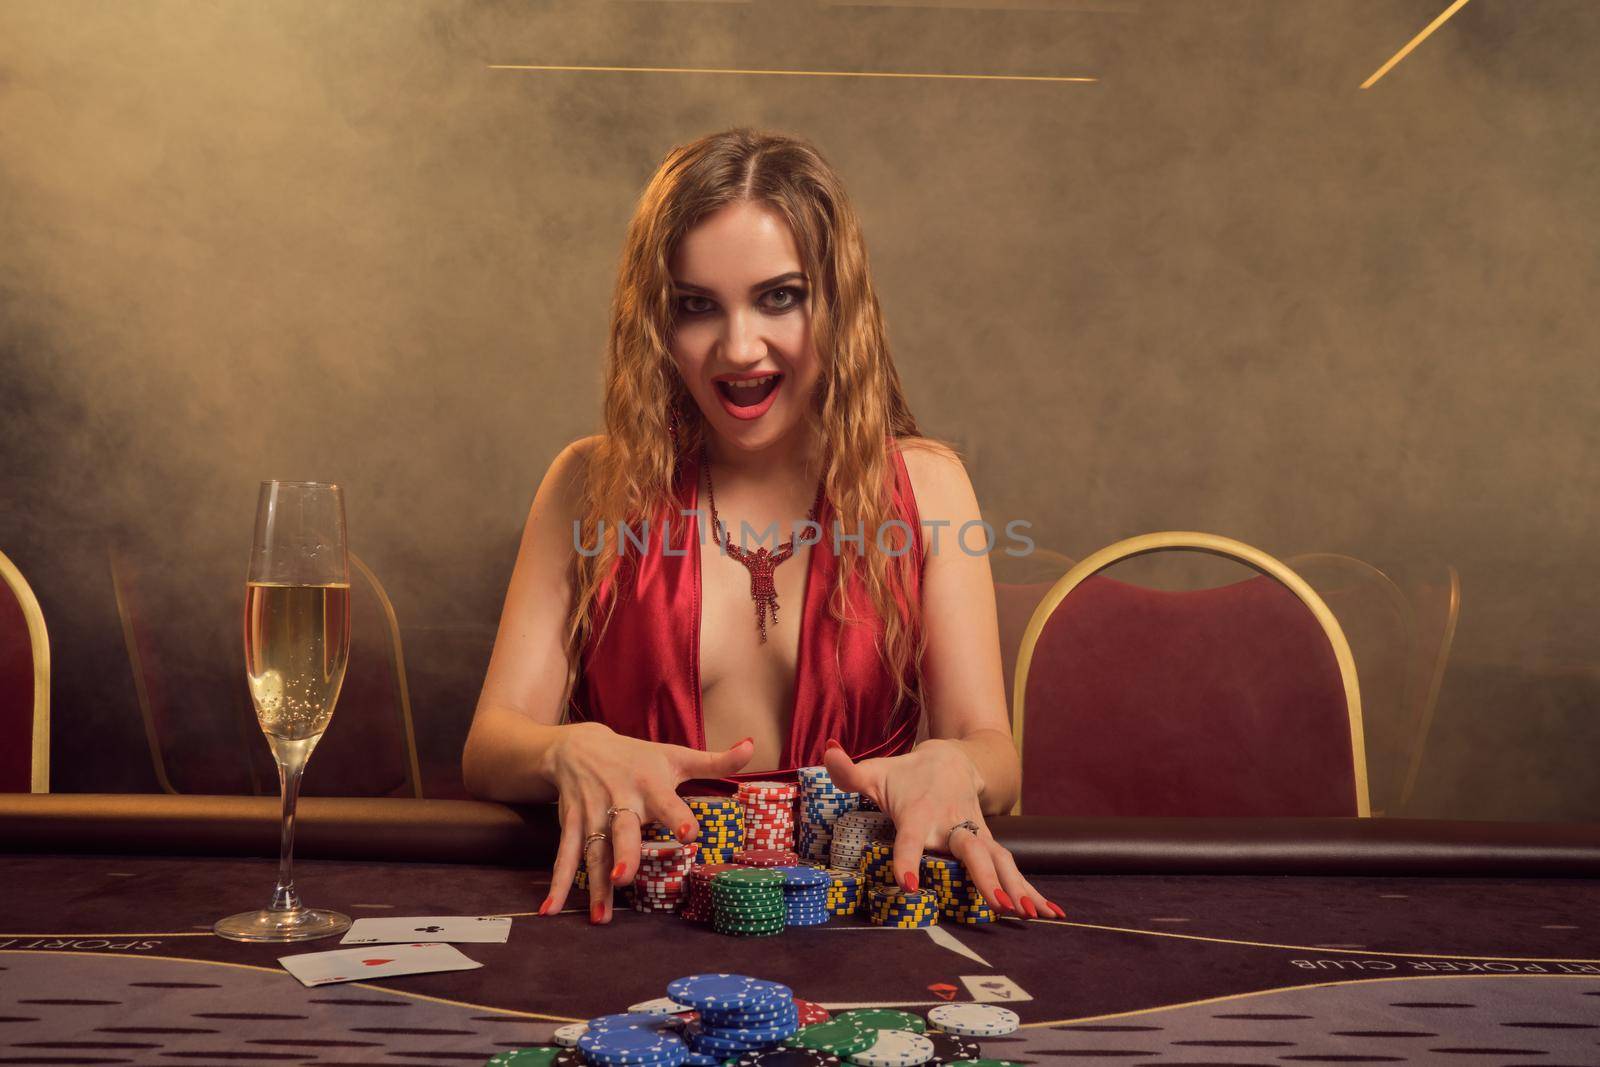 Attractive woman with a long curly hair and perfect make-up, dressed in a sexy red dress. She is sitting at a gambling table, holding some gambling chips and smiling. Poker concept on a dark smoke background in a ray of a yellow spotlight. Casino.